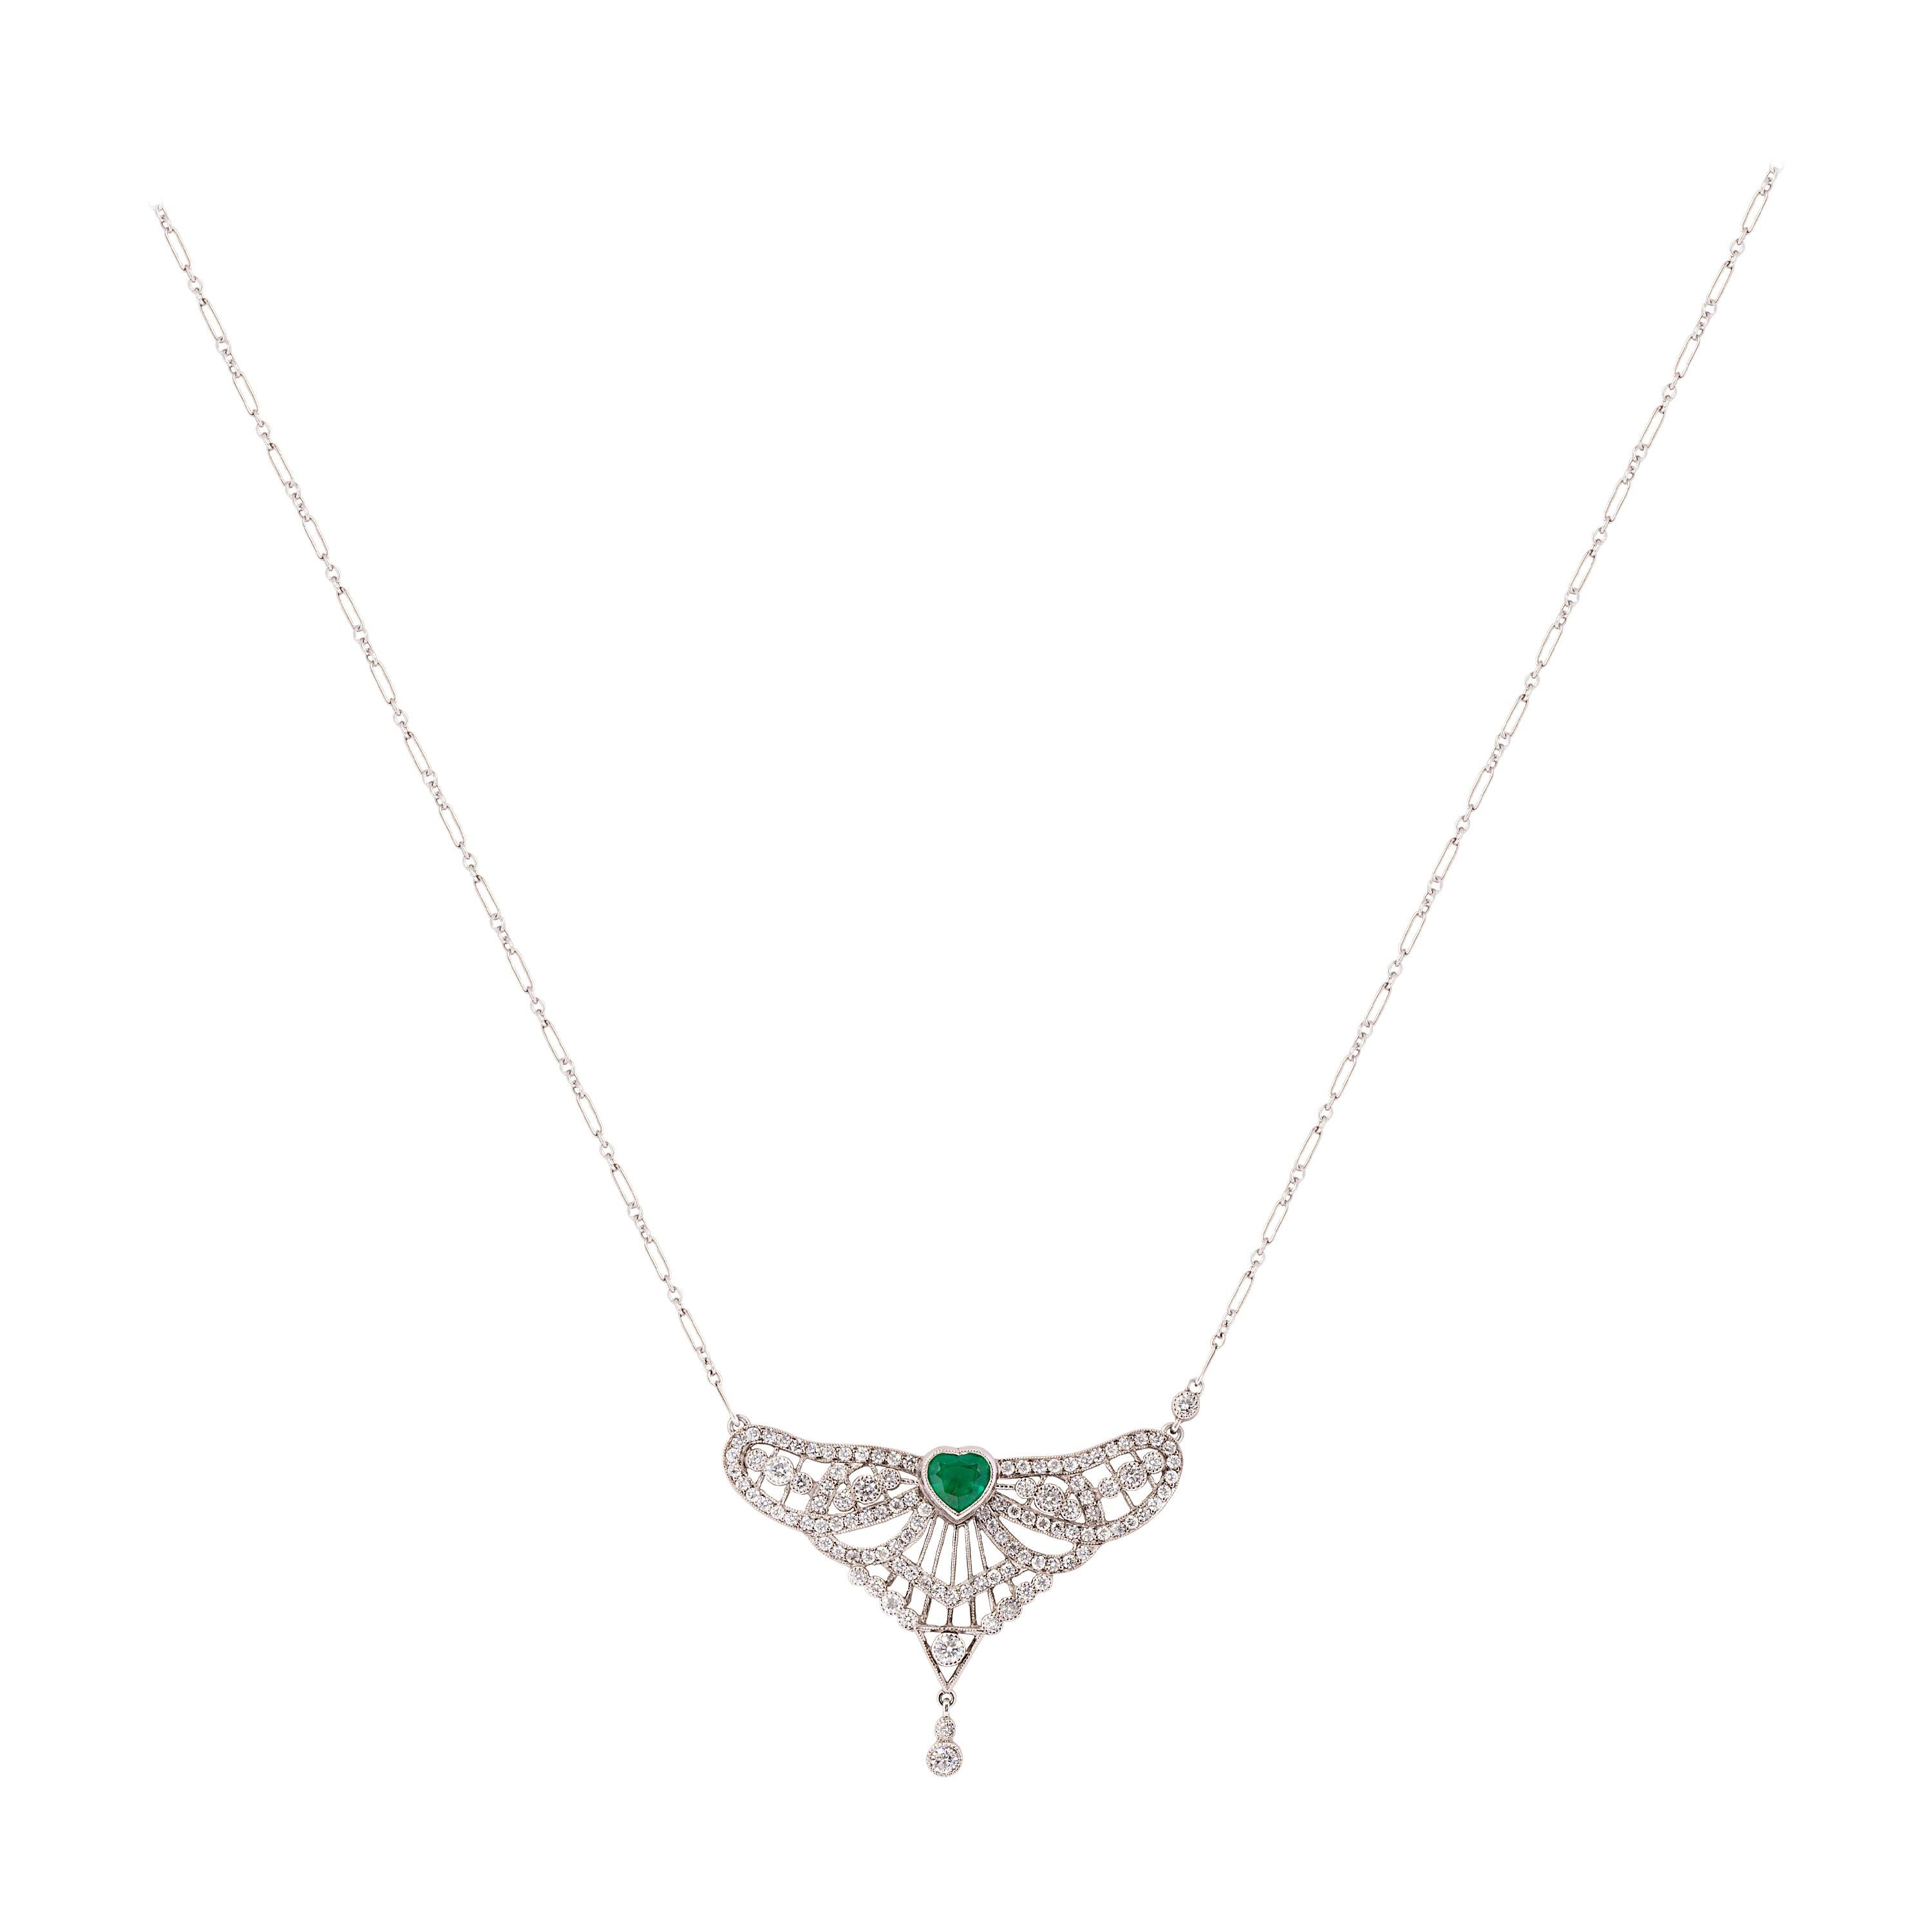 Heart Cut Gems Are Forever Art Deco Inspired Handcrafted 0.81 Ct Heart Emerald and Diamond For Sale